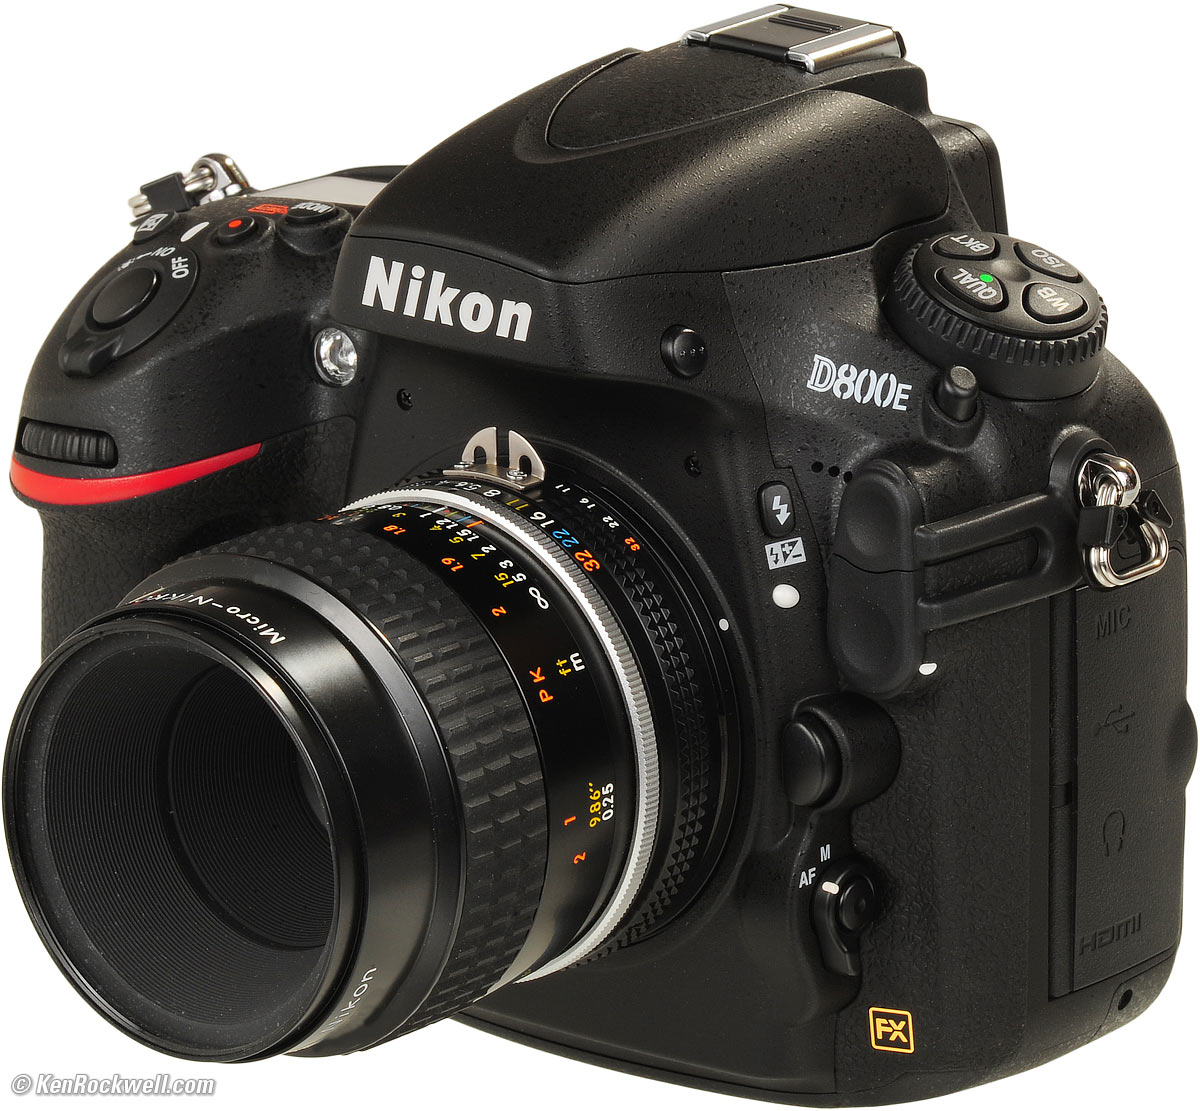 Nikon D800 Review & Sample Image Files by Ken Rockwell